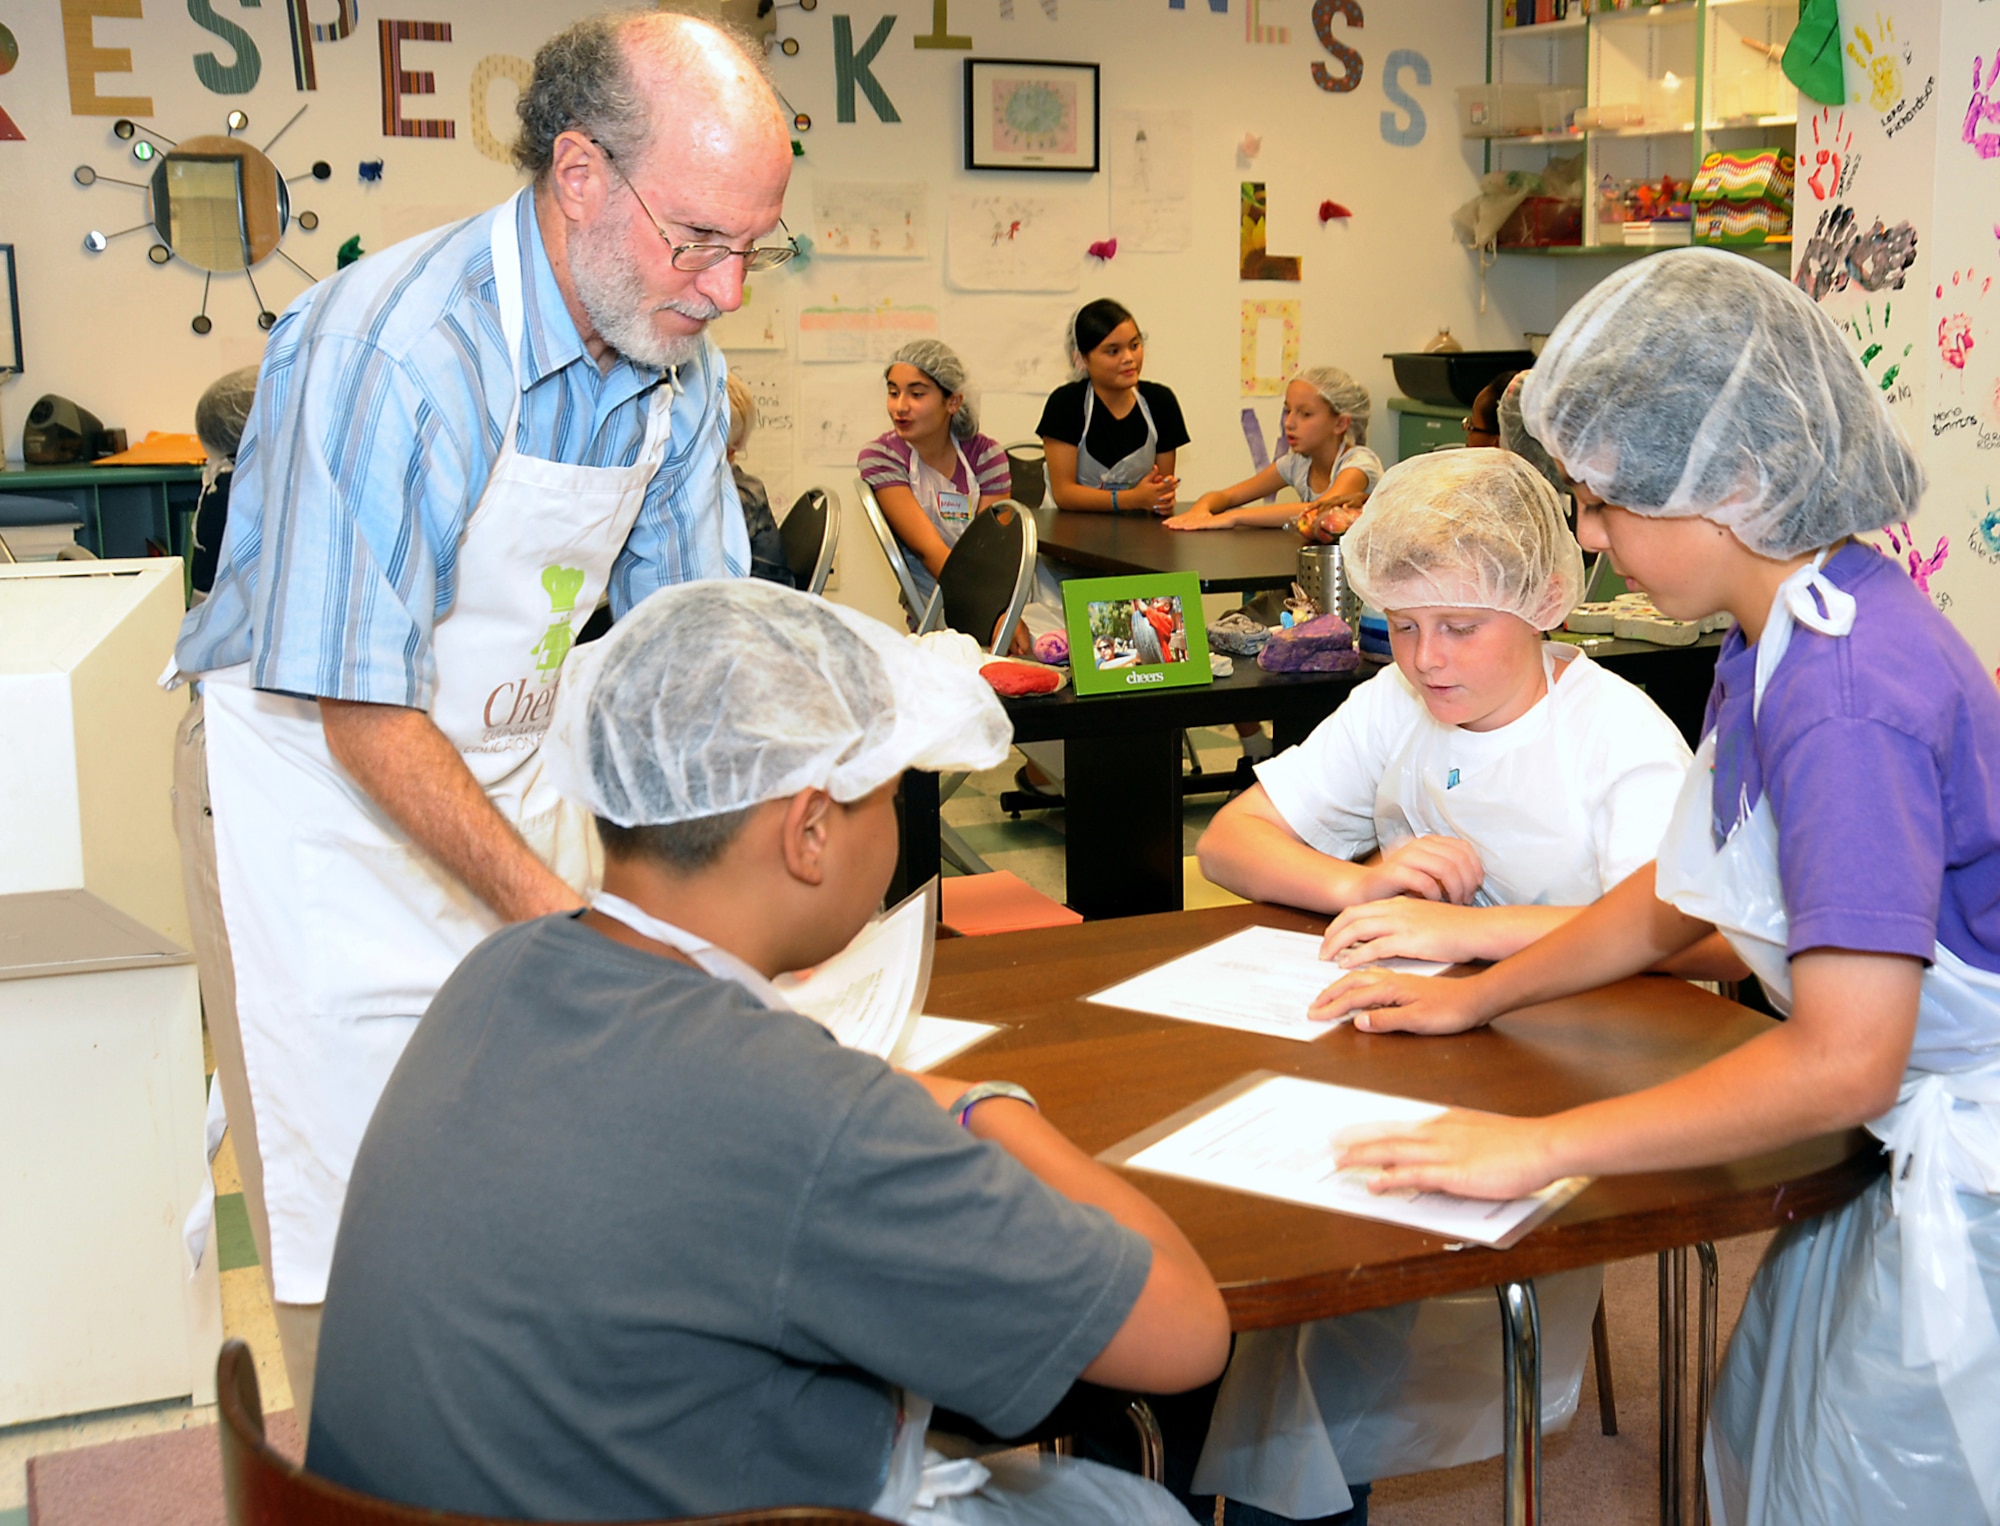 Aaron Reaven from “Chef-K “helps 4-H participants plan a meal during the recent culinary camp. The kids learned about food preparation and kitchen safety. (Photo by Joe Juarez)